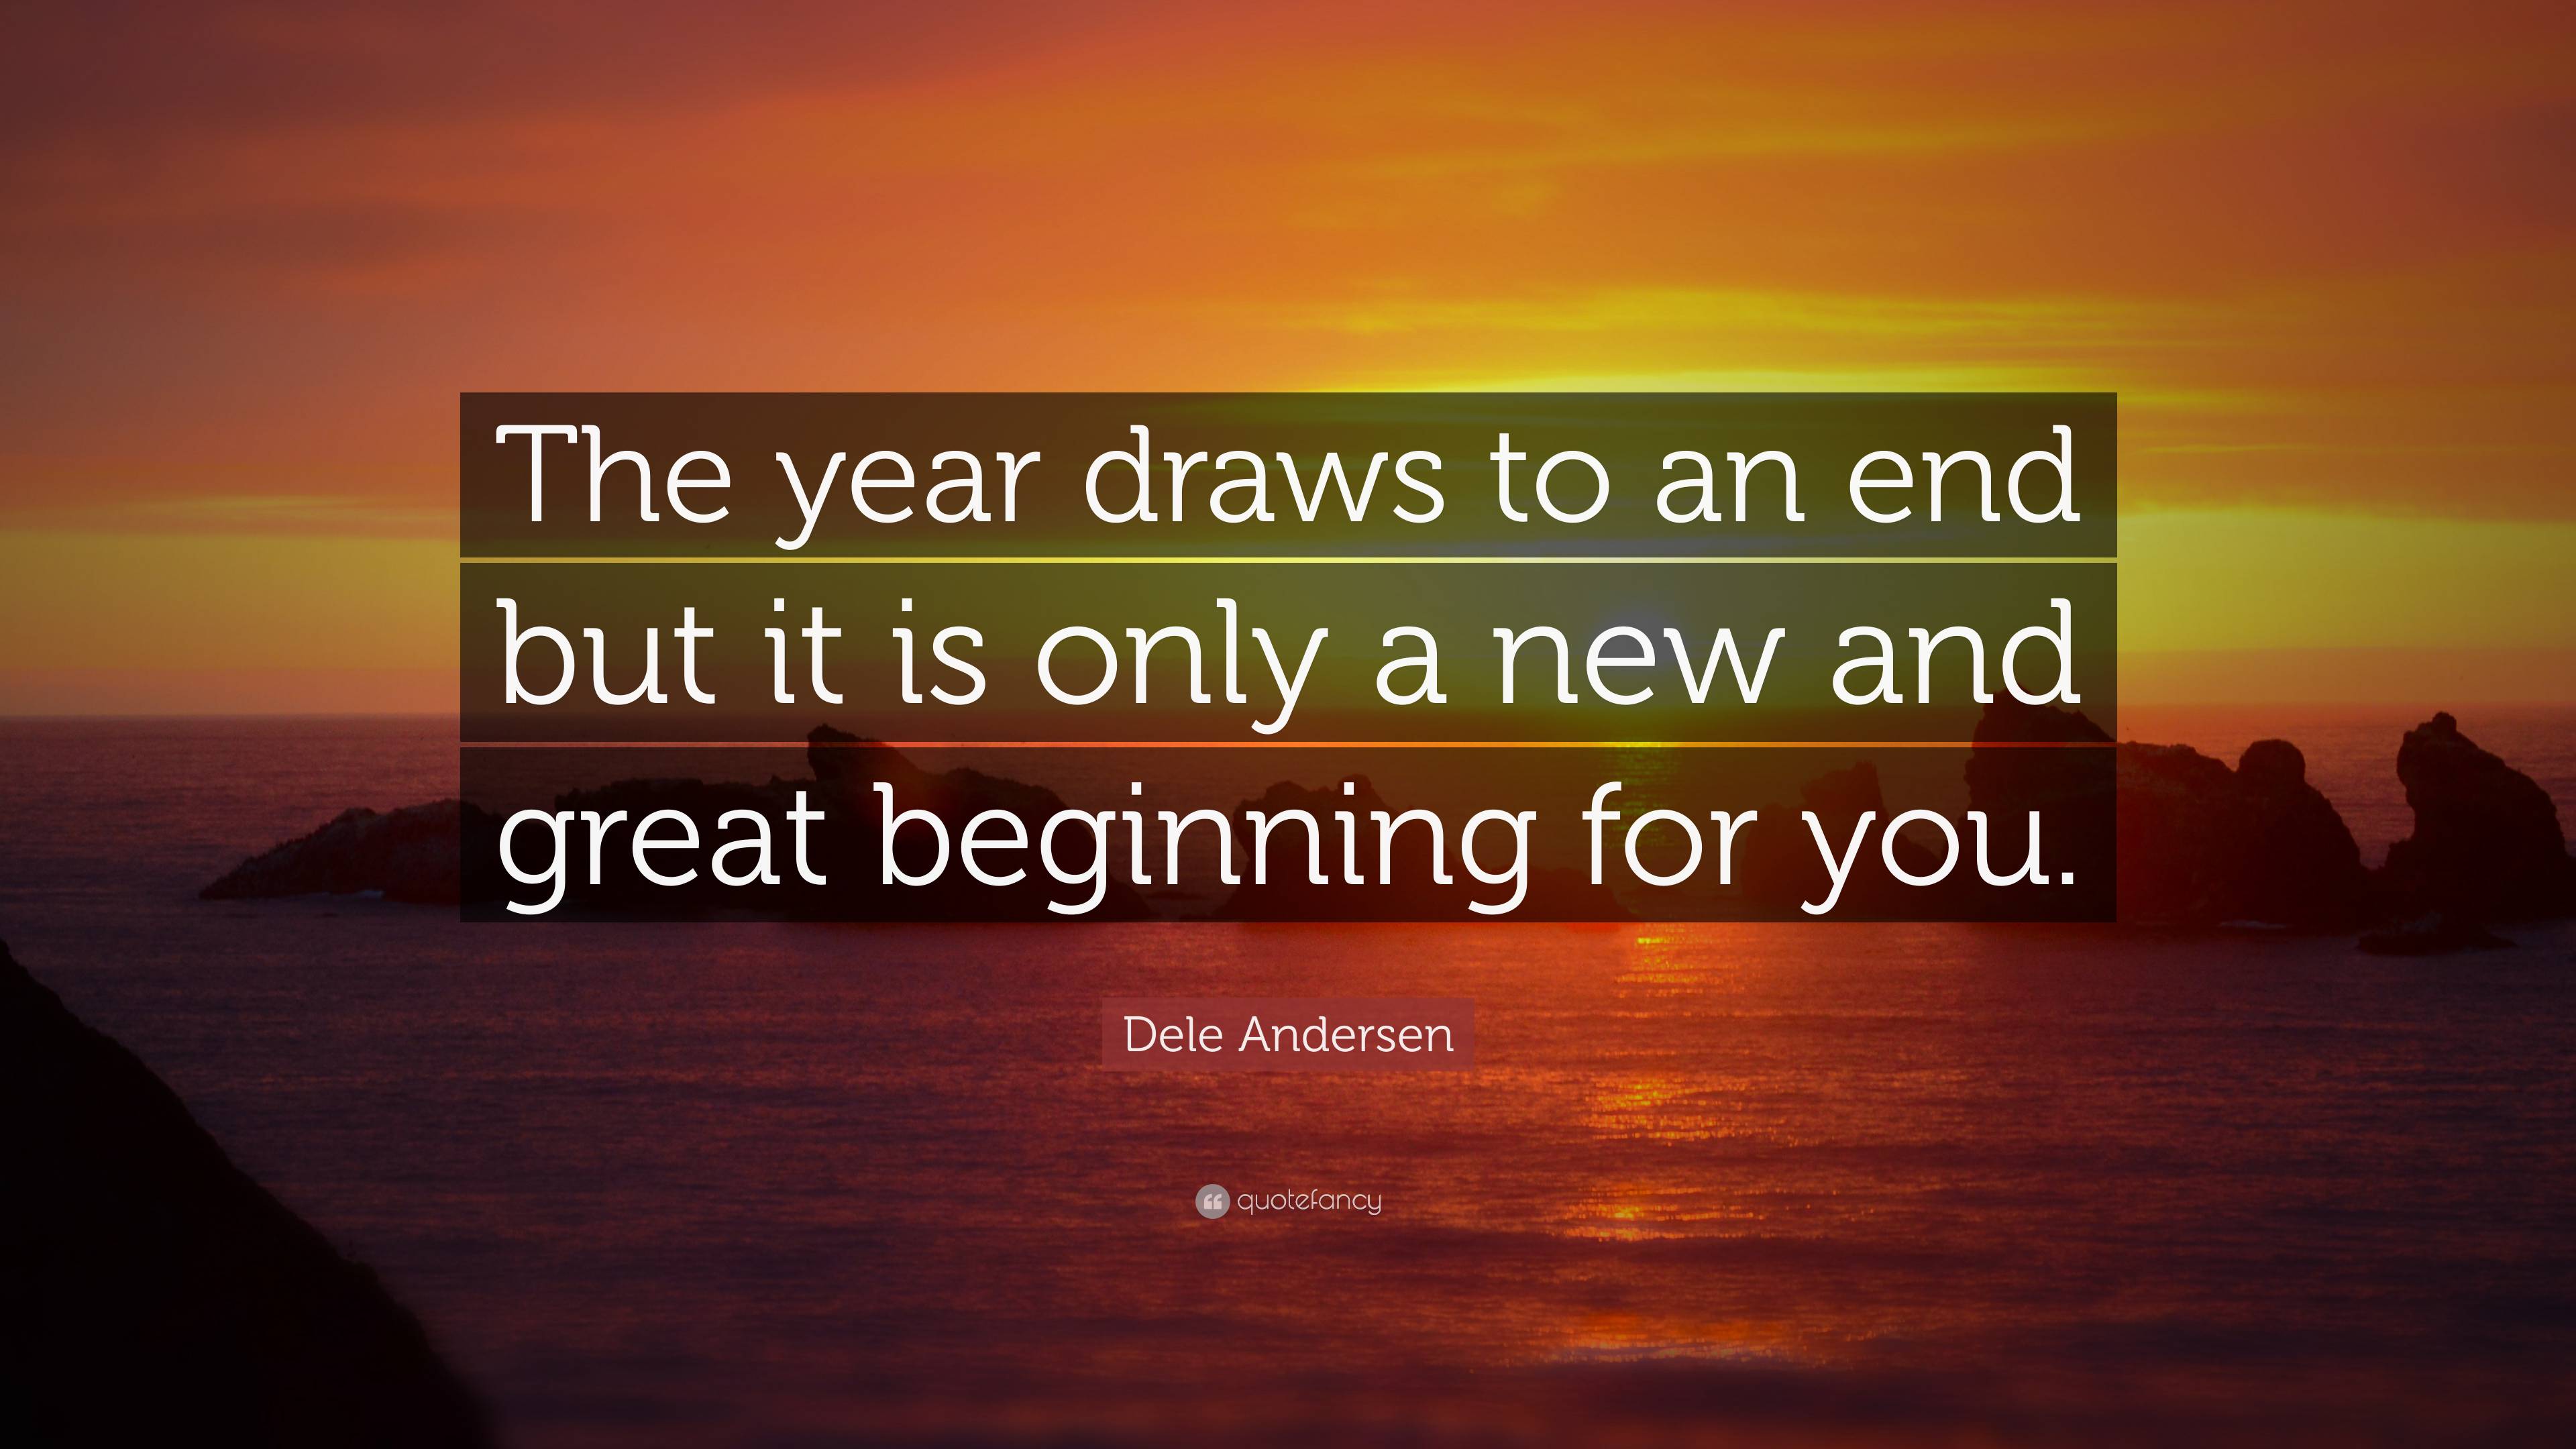 Dele Andersen Quote “The year draws to an end but it is only a new and